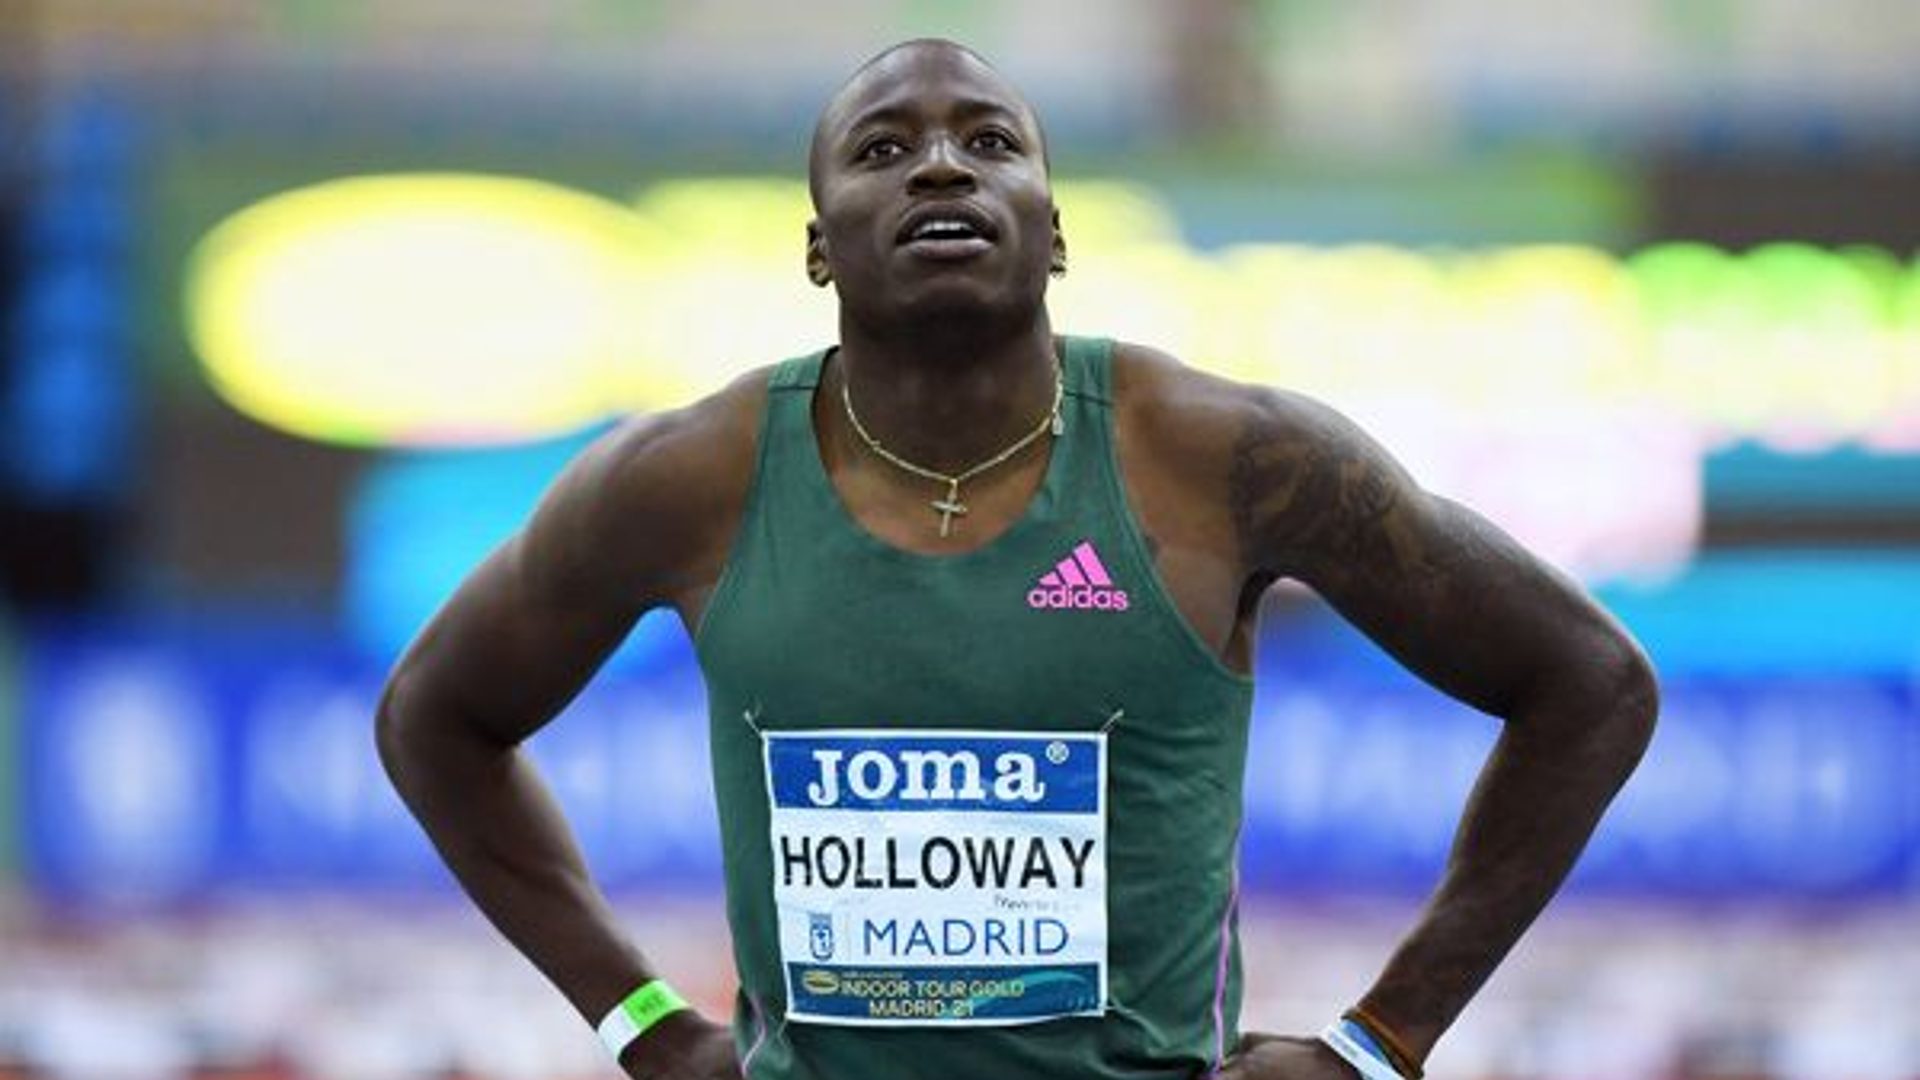 Grant Holloway at the Indoor Tour Gold 2021 in Madrid (Image Credits - World Athletics)